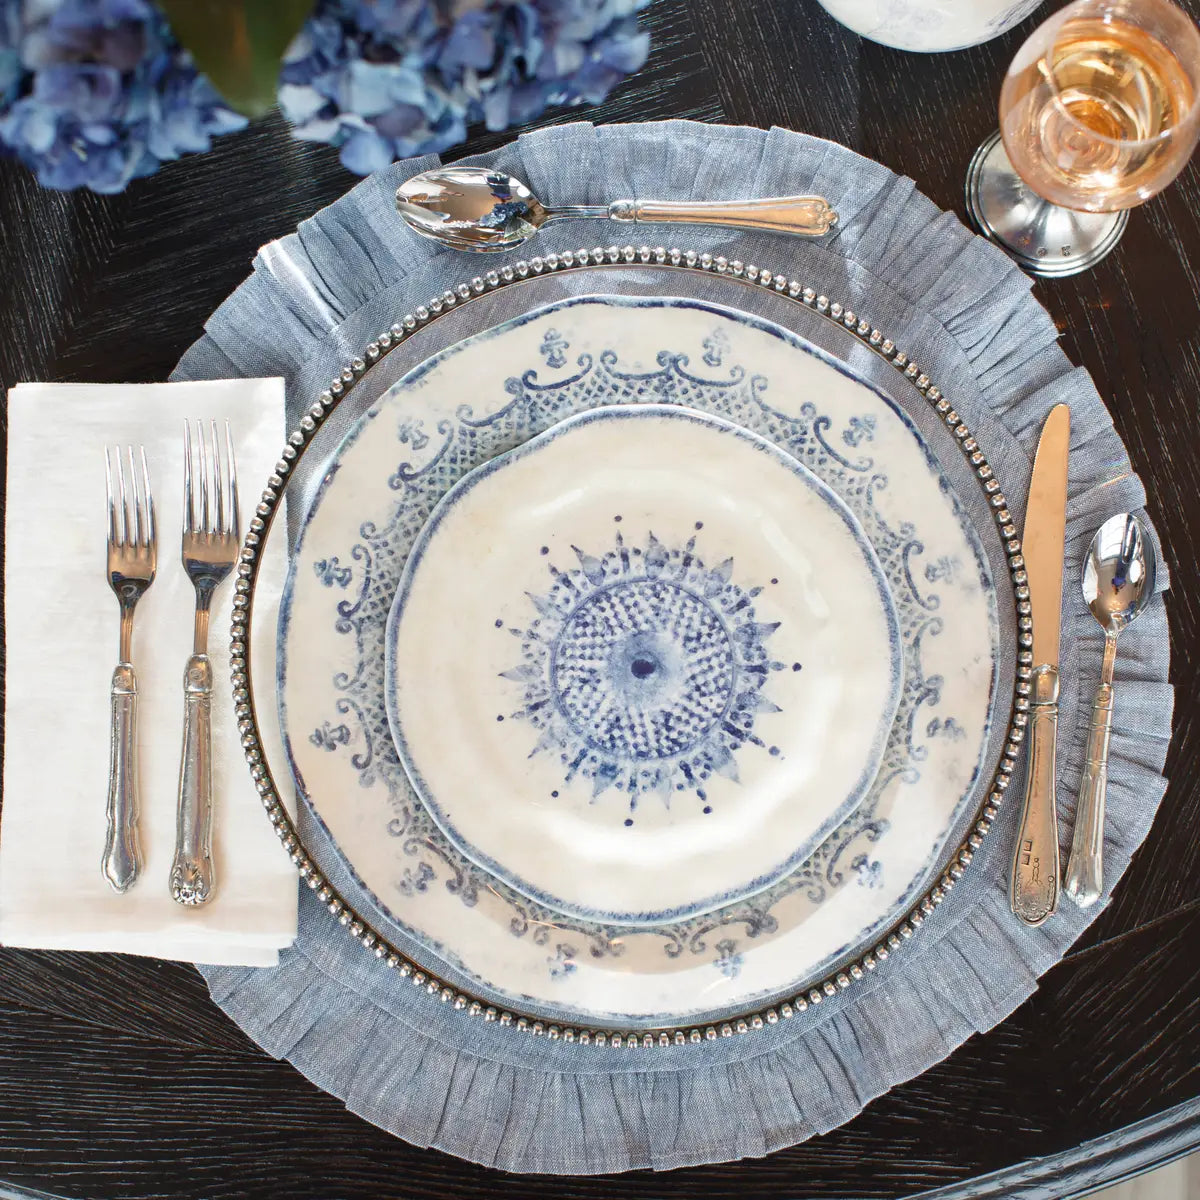 Round Ruffle Linen Placemat